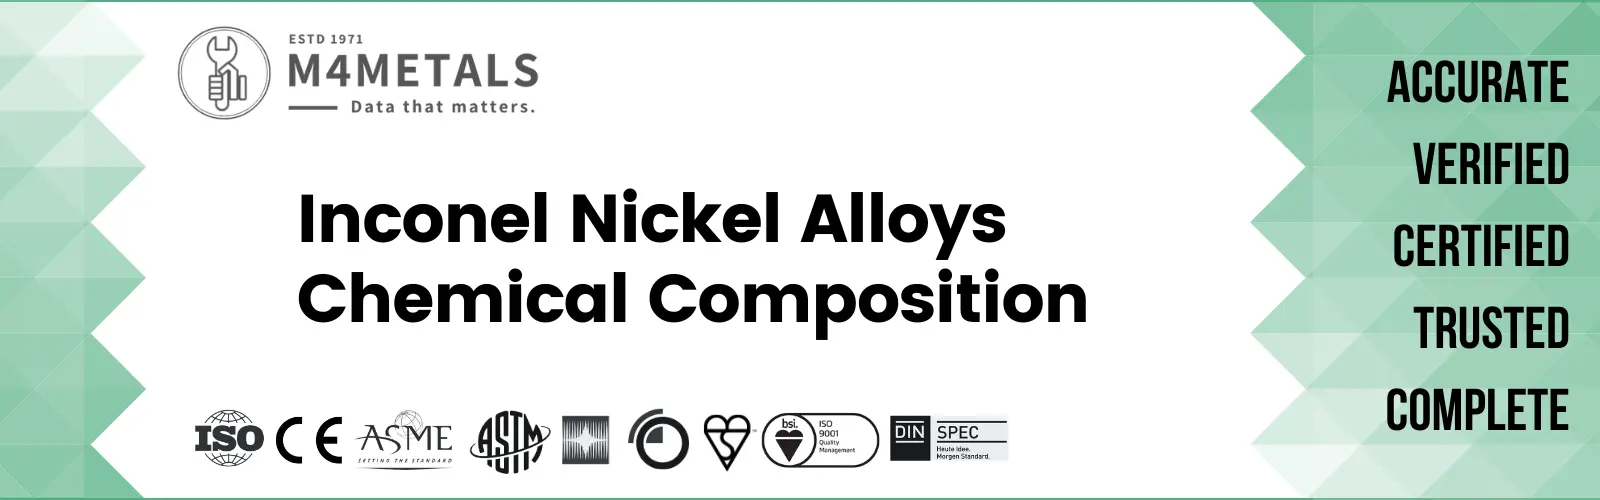 Inconel Nickel-alloy Chemical Composition